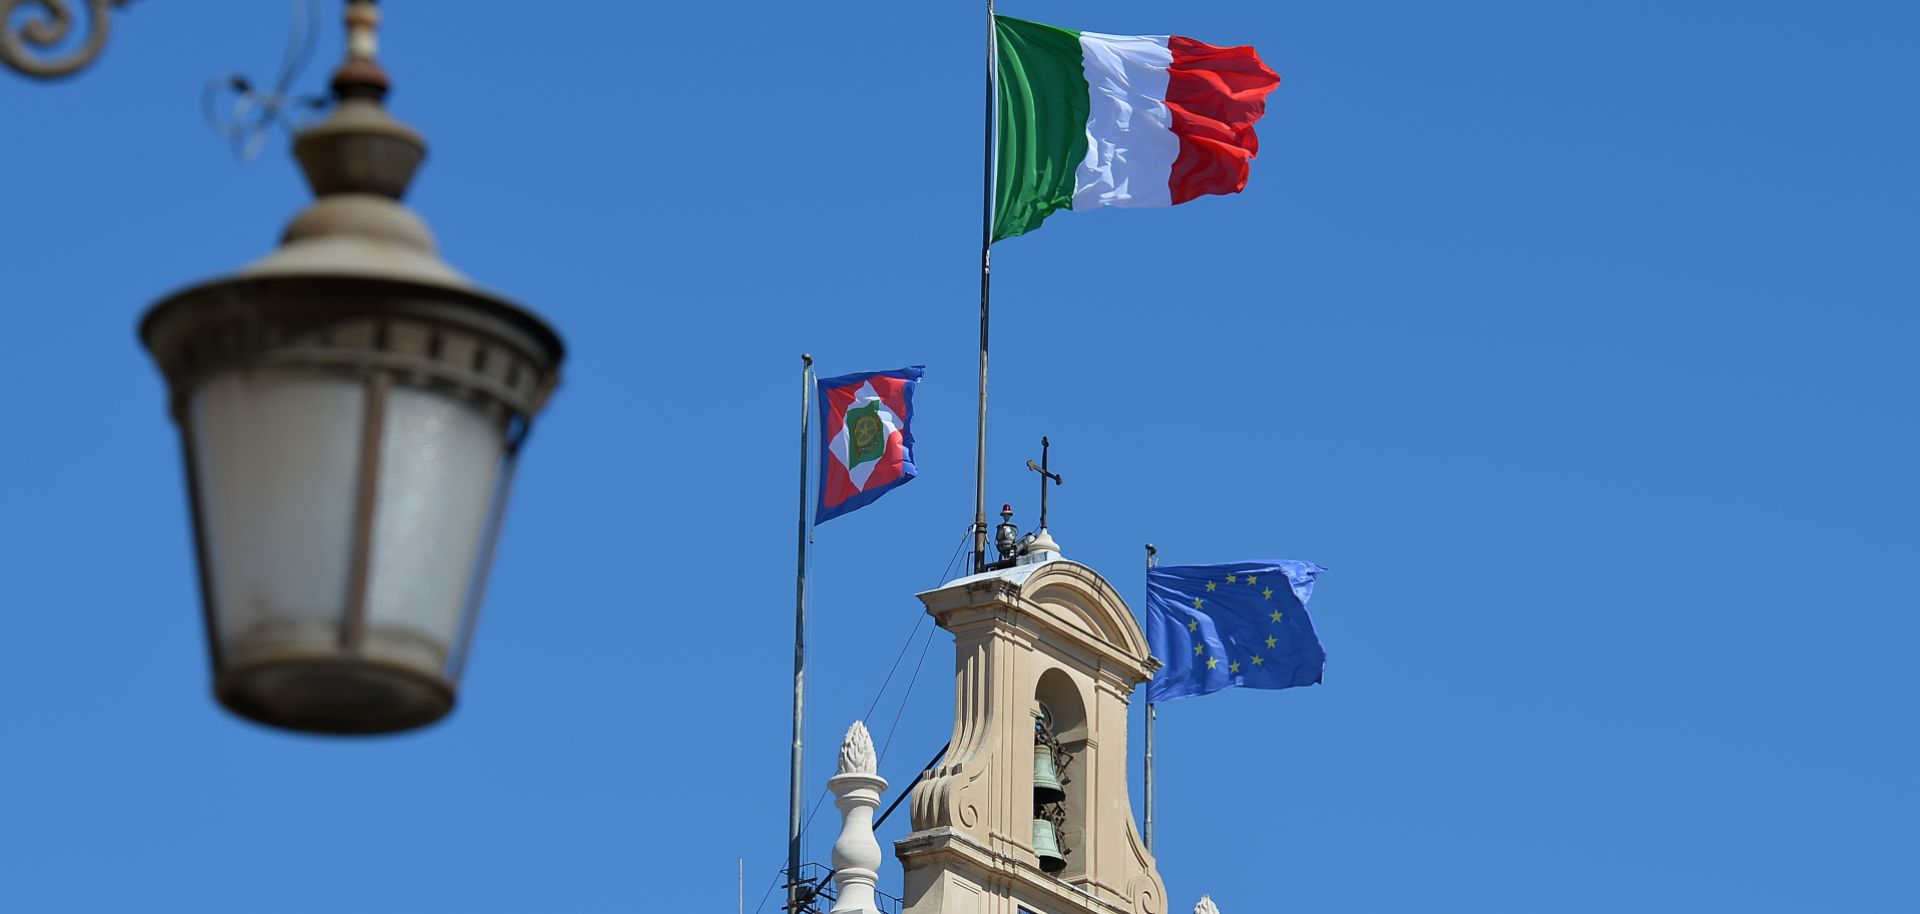 The Italian and EU flags fly over the Quirinale Palace in Rome.